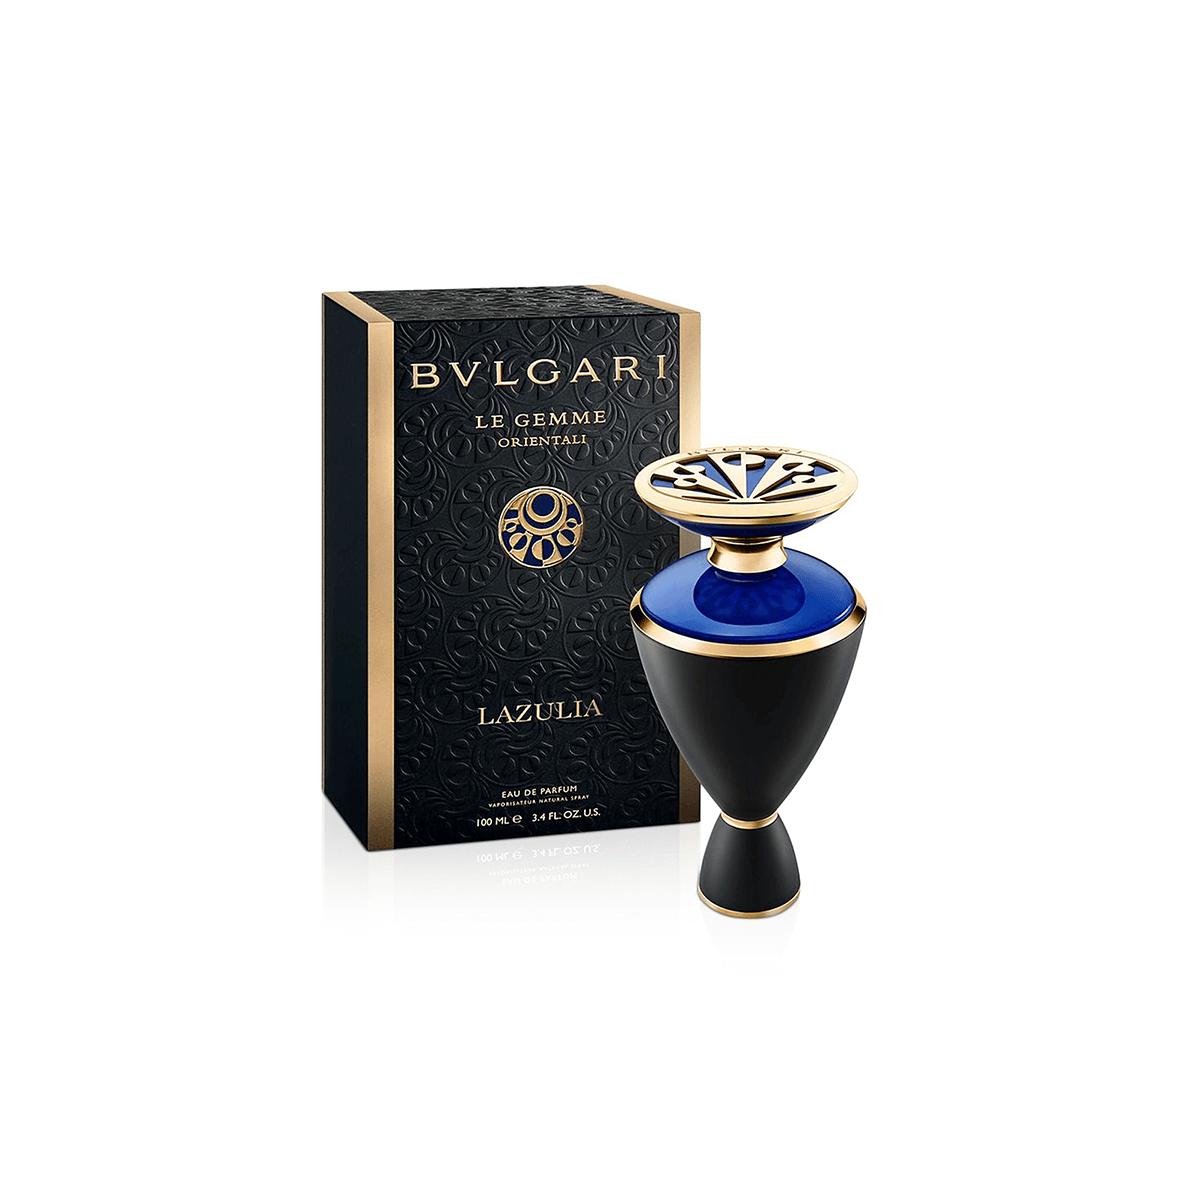 The emanation of flavors and scent notes for Le Gemme Murano Lazulia unfurl in a whiff of white flowers opening top notes including jasmine. The balsam heart center notes blend in with incense while the deep animal wildlife and woody base notes leave an impression of oud and ambergris.